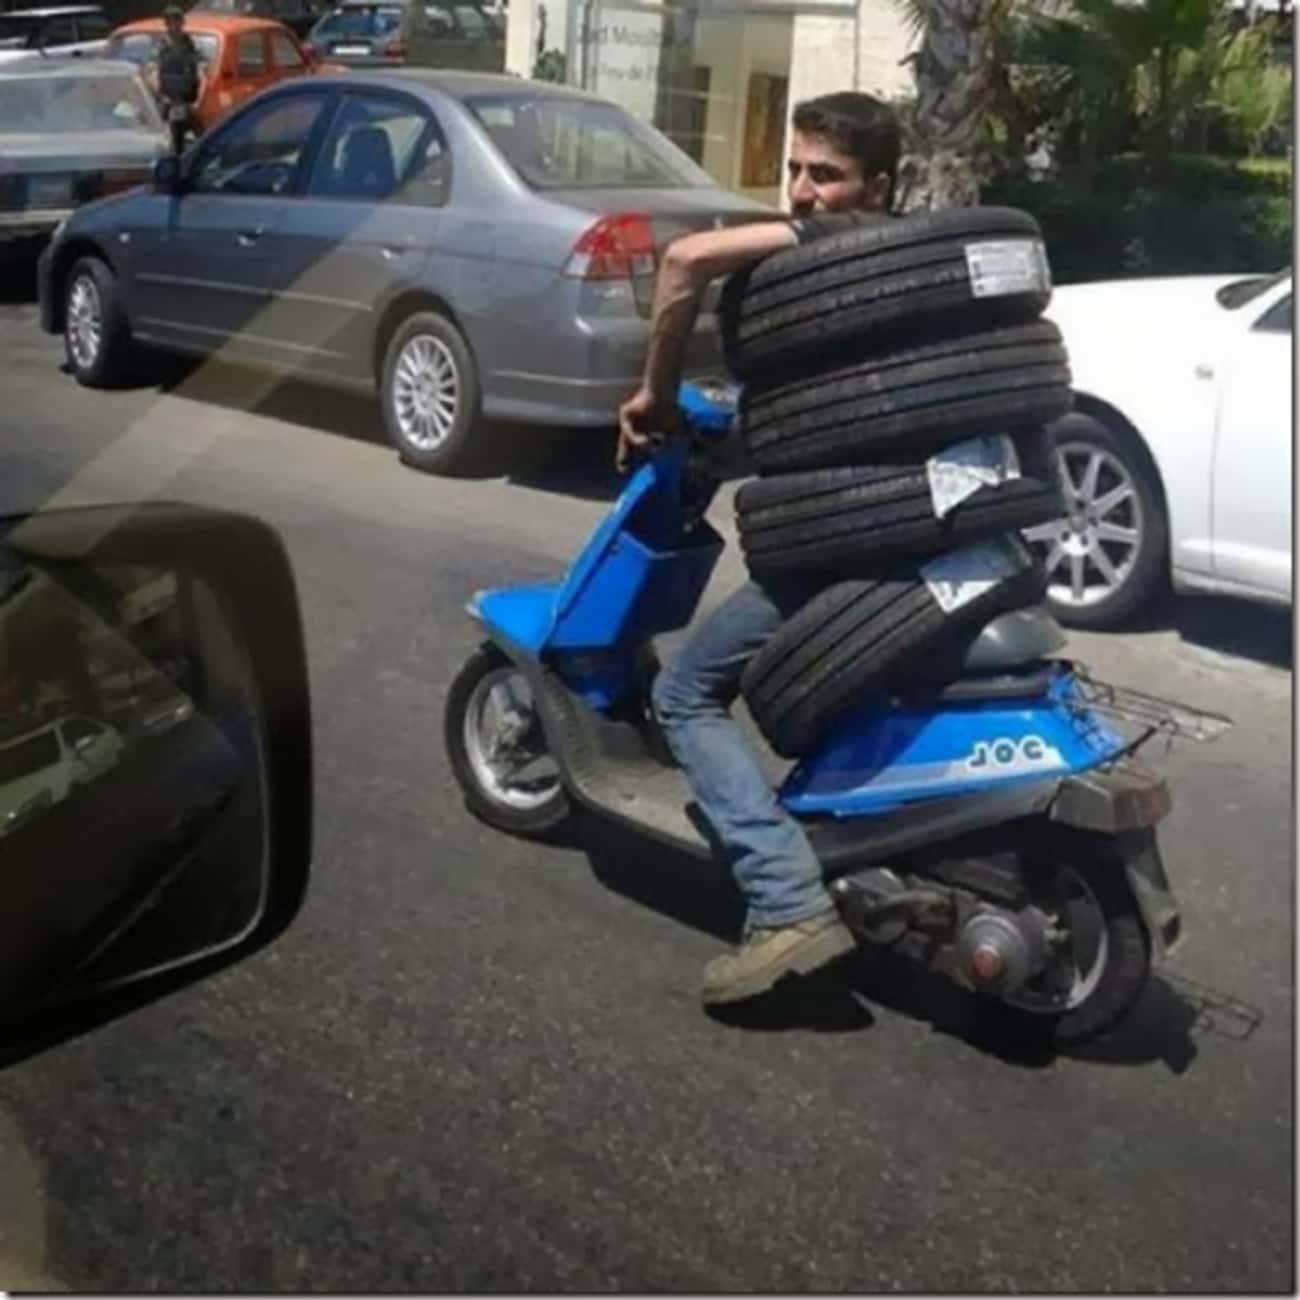 Make Sure To Wear Protective Padding When Scootering